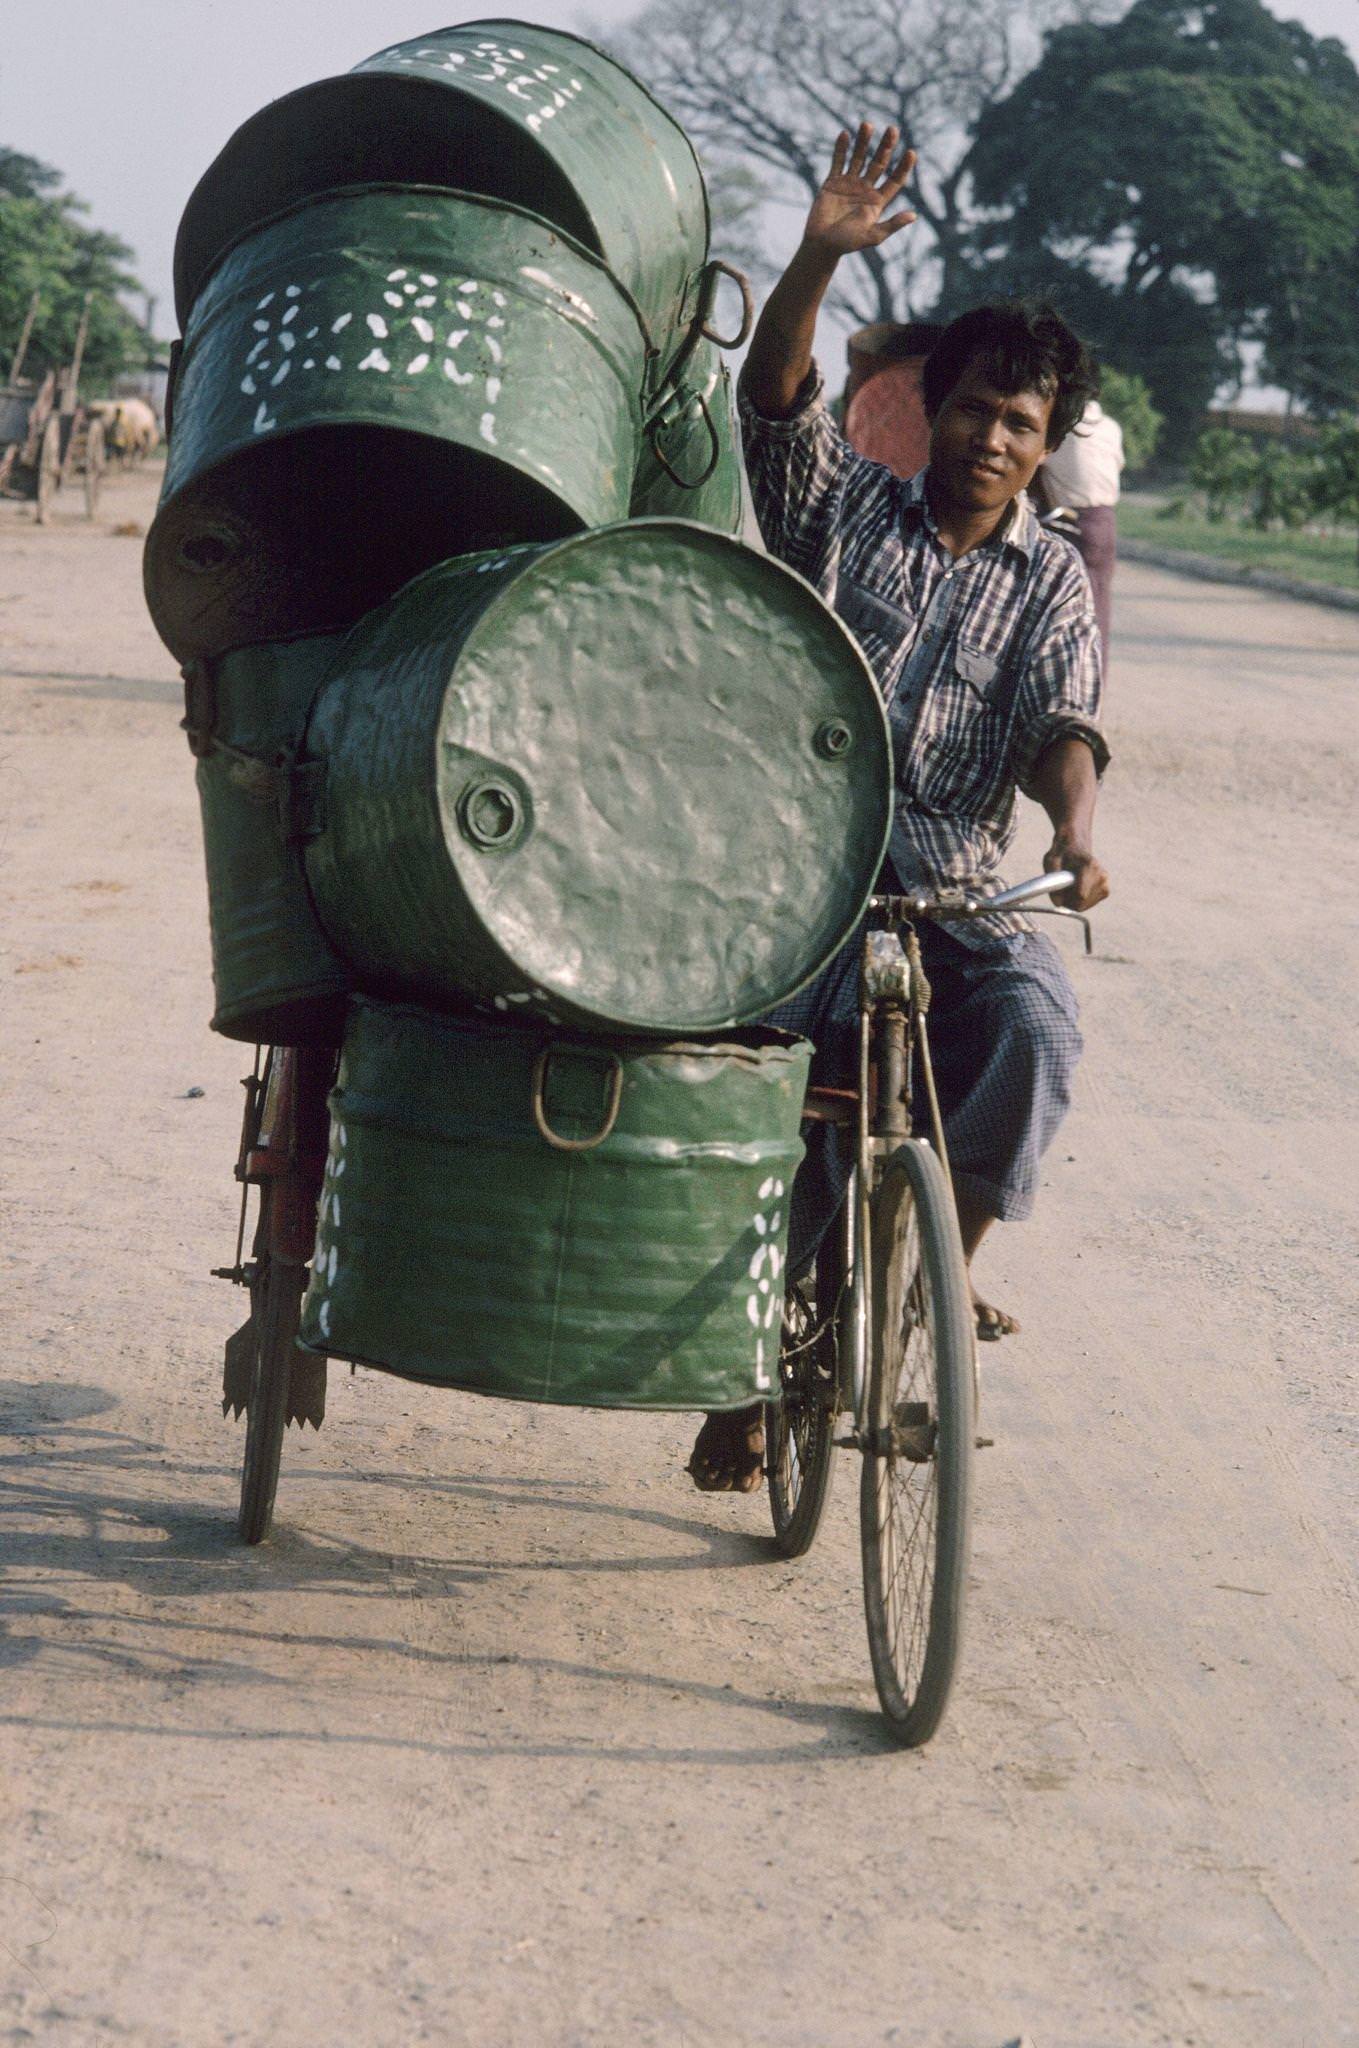 Mandalay, Myanmar - Man Going to Mandalay Market with Jerrycans, 1980s